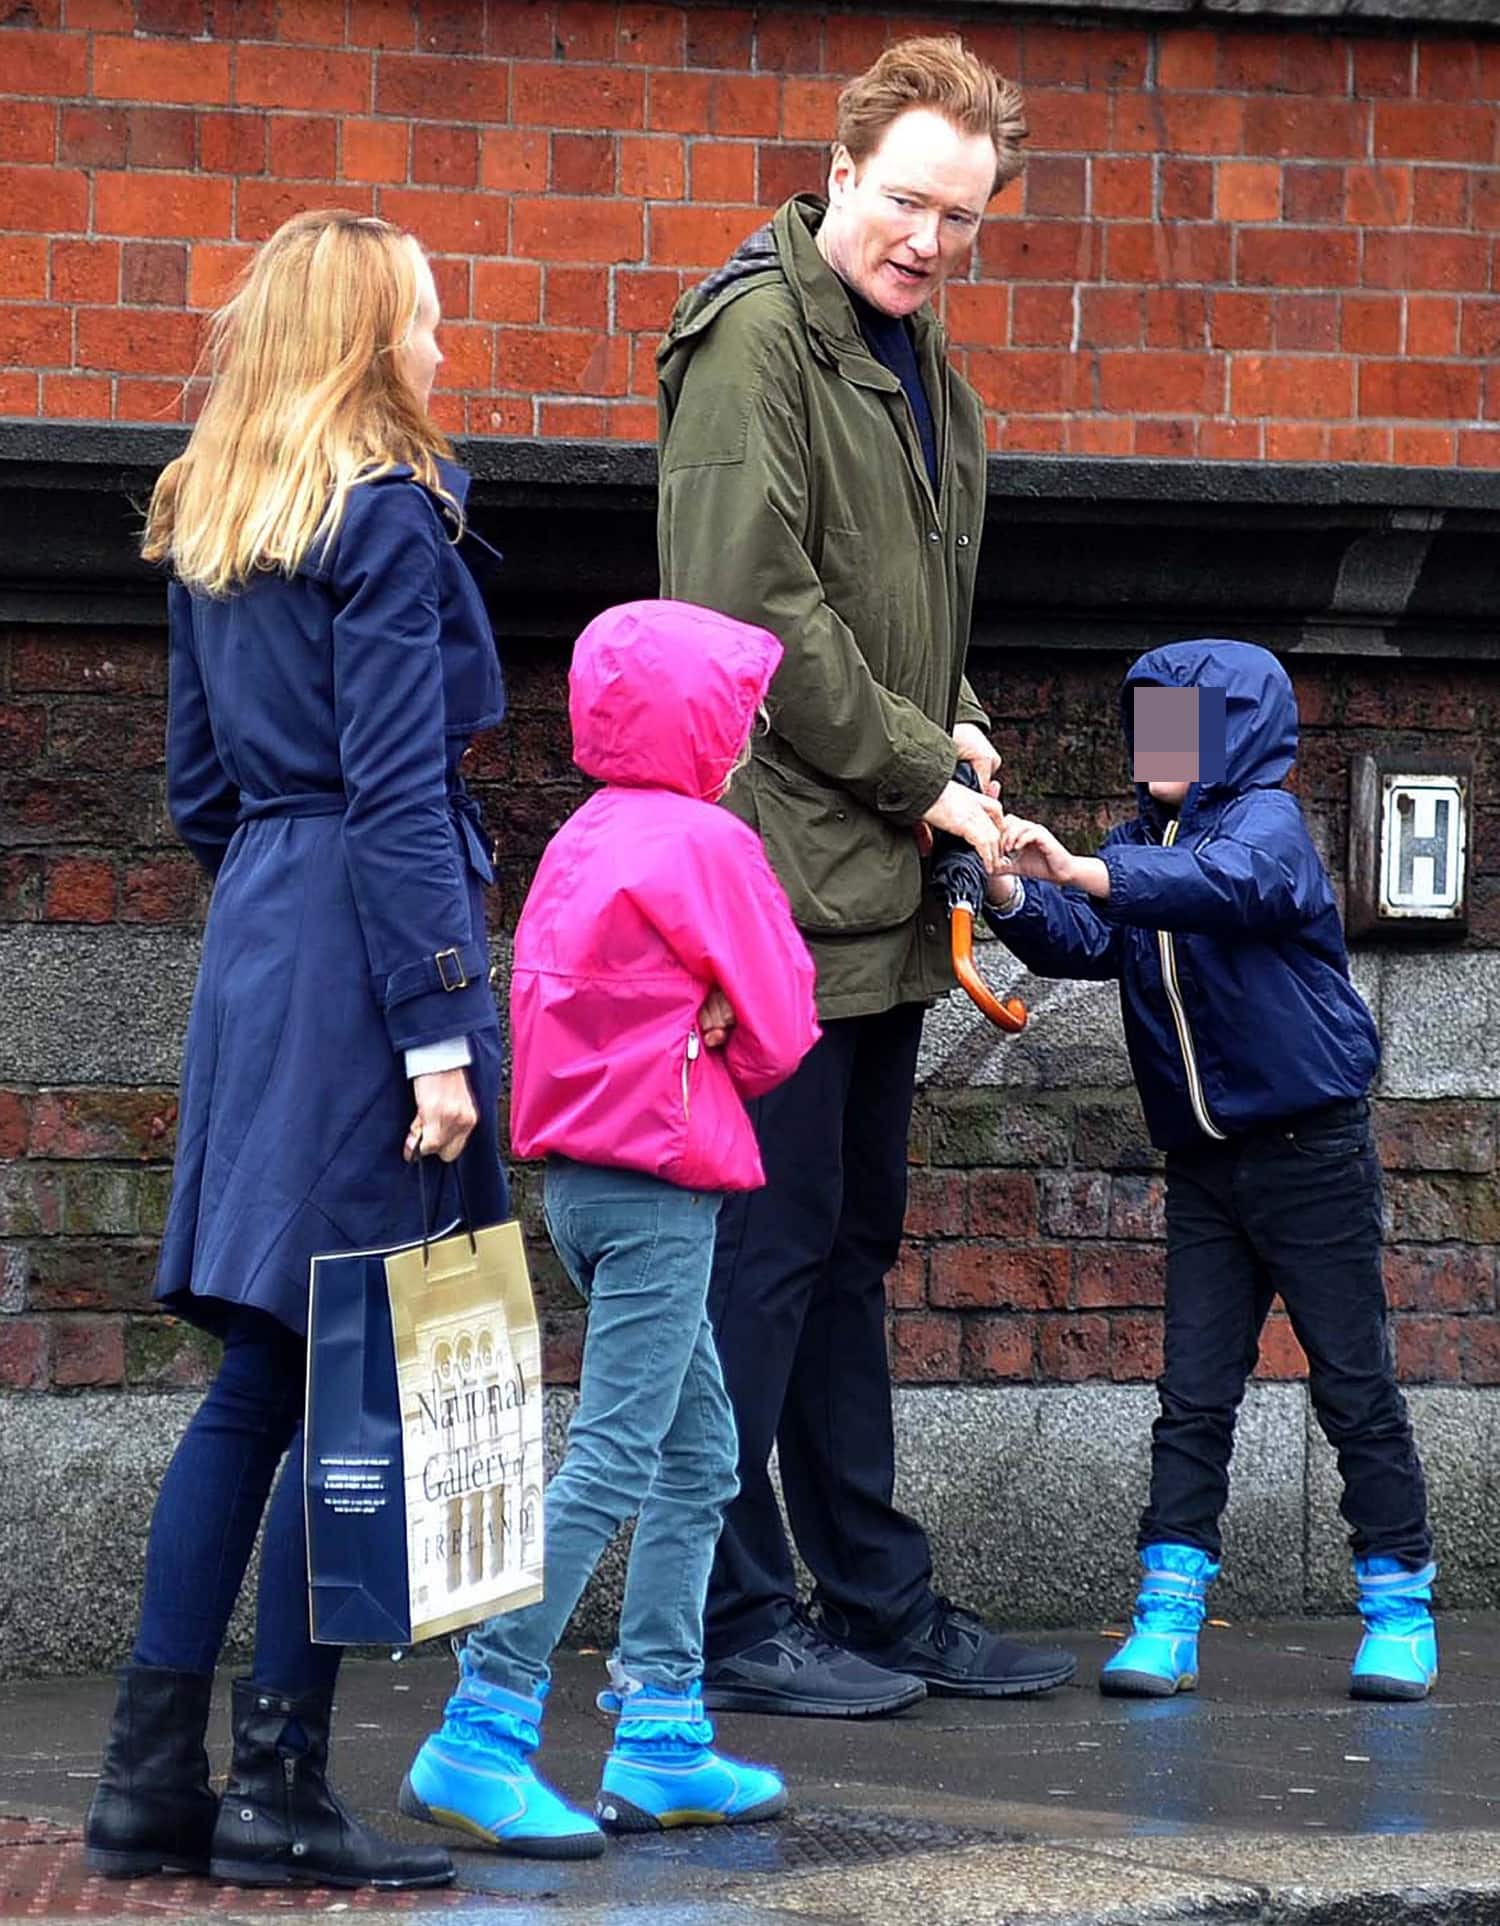 Conan O'Brien and his wife Liza Powel visiting Ireland in 2012 with their children Neve and Beckett